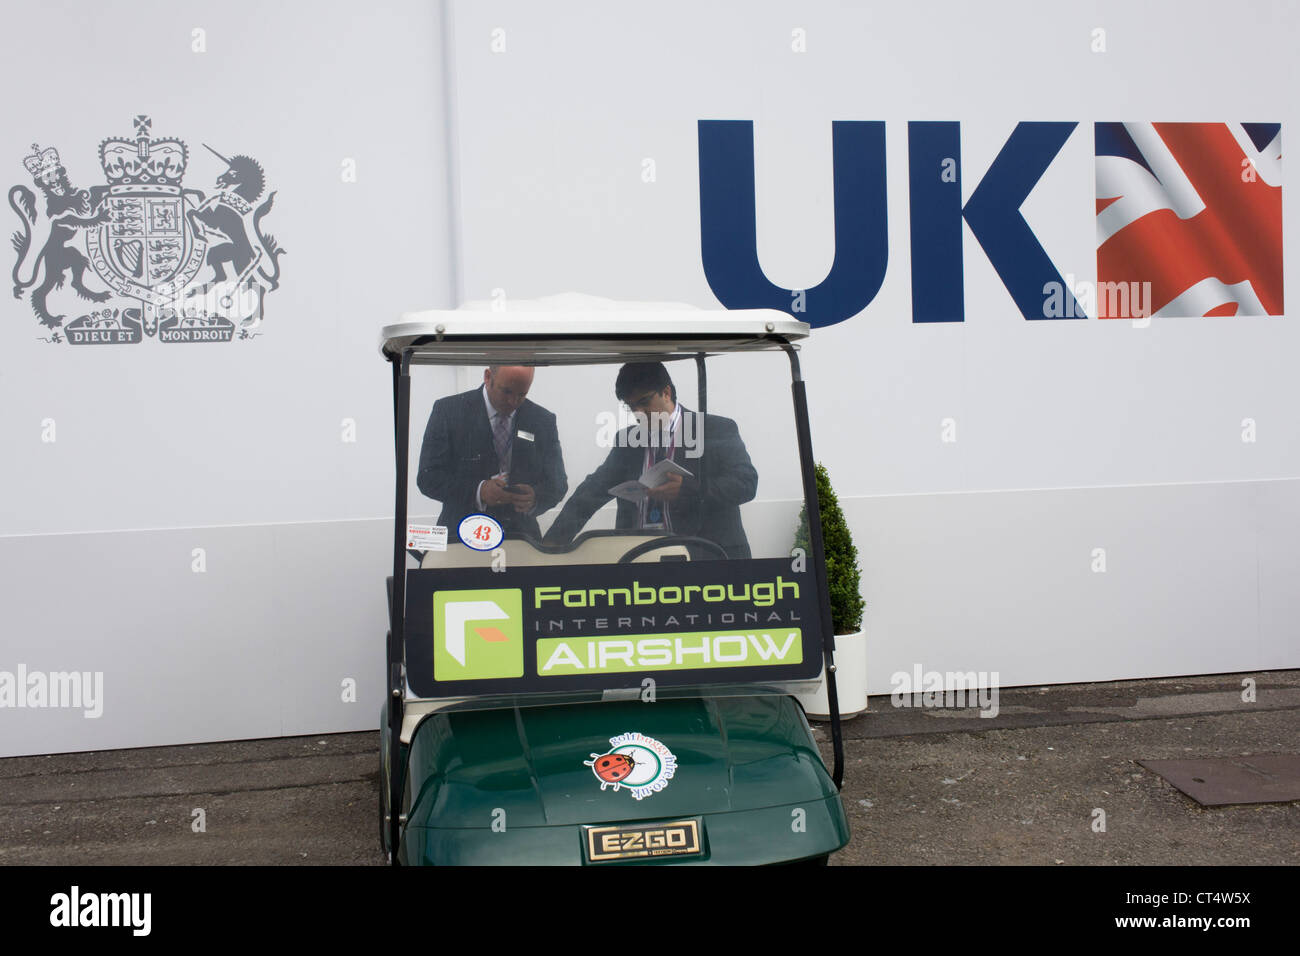 Delegates discuss business outside the UK exhibition chalet at the Farnborough Air Show. Stock Photo